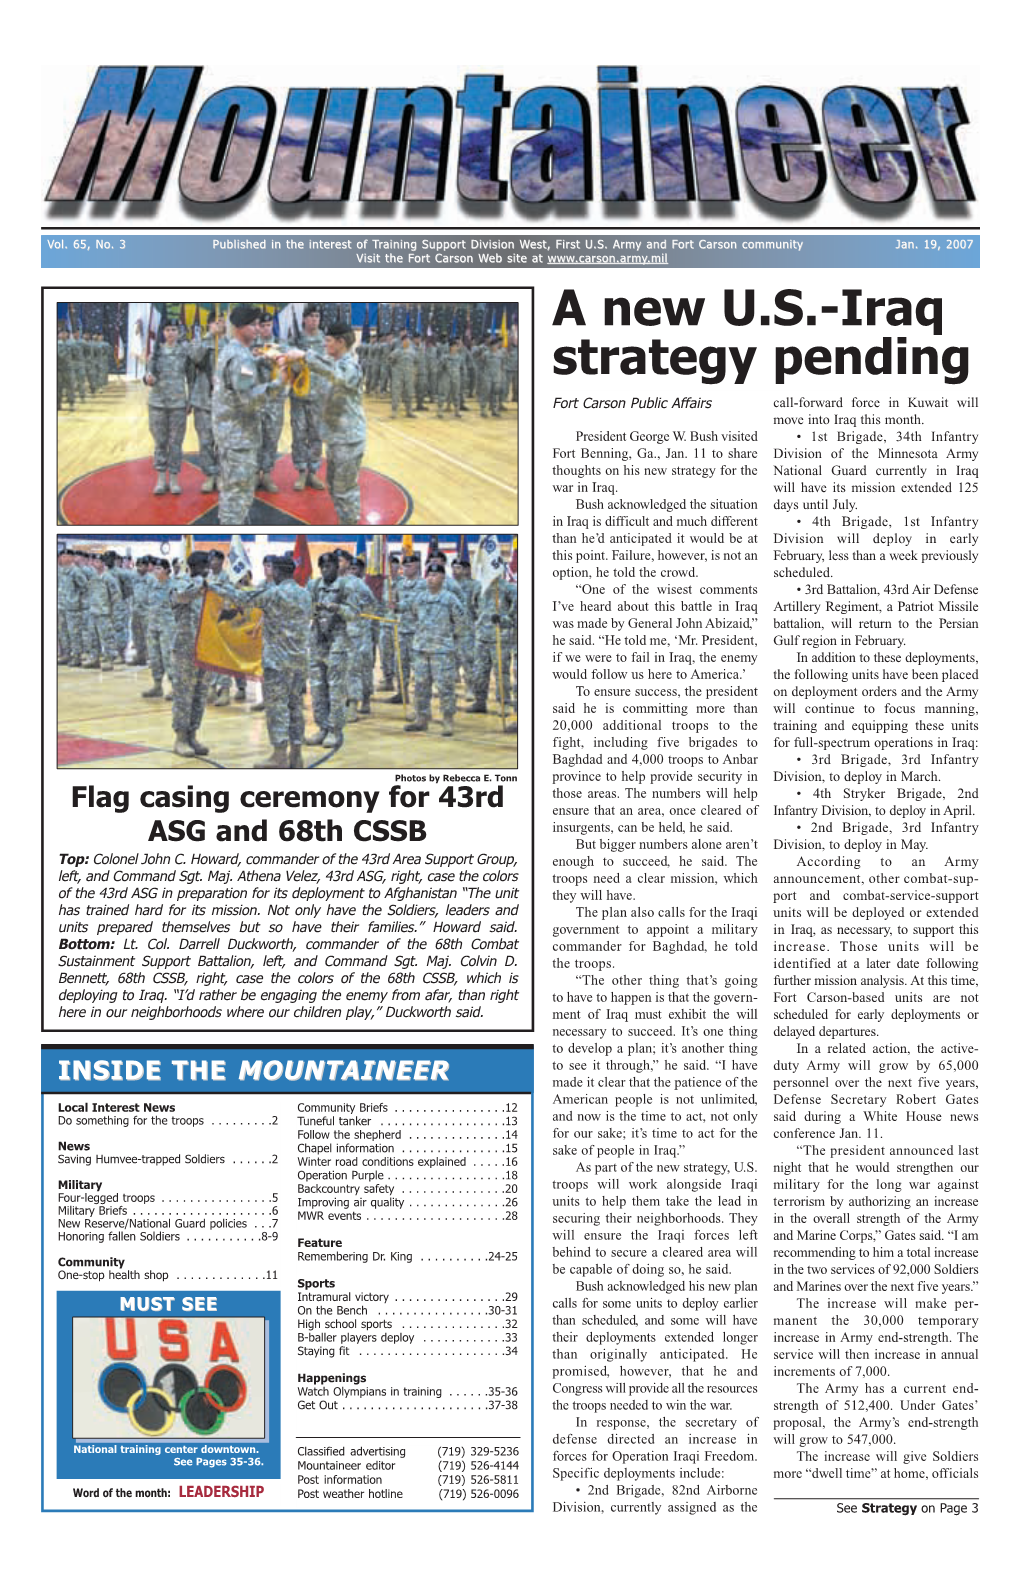 A New U.S.-Iraq Strategy Pending Fort Carson Public Affairs Call-Forward Force in Kuwait Will Move Into Iraq This Month